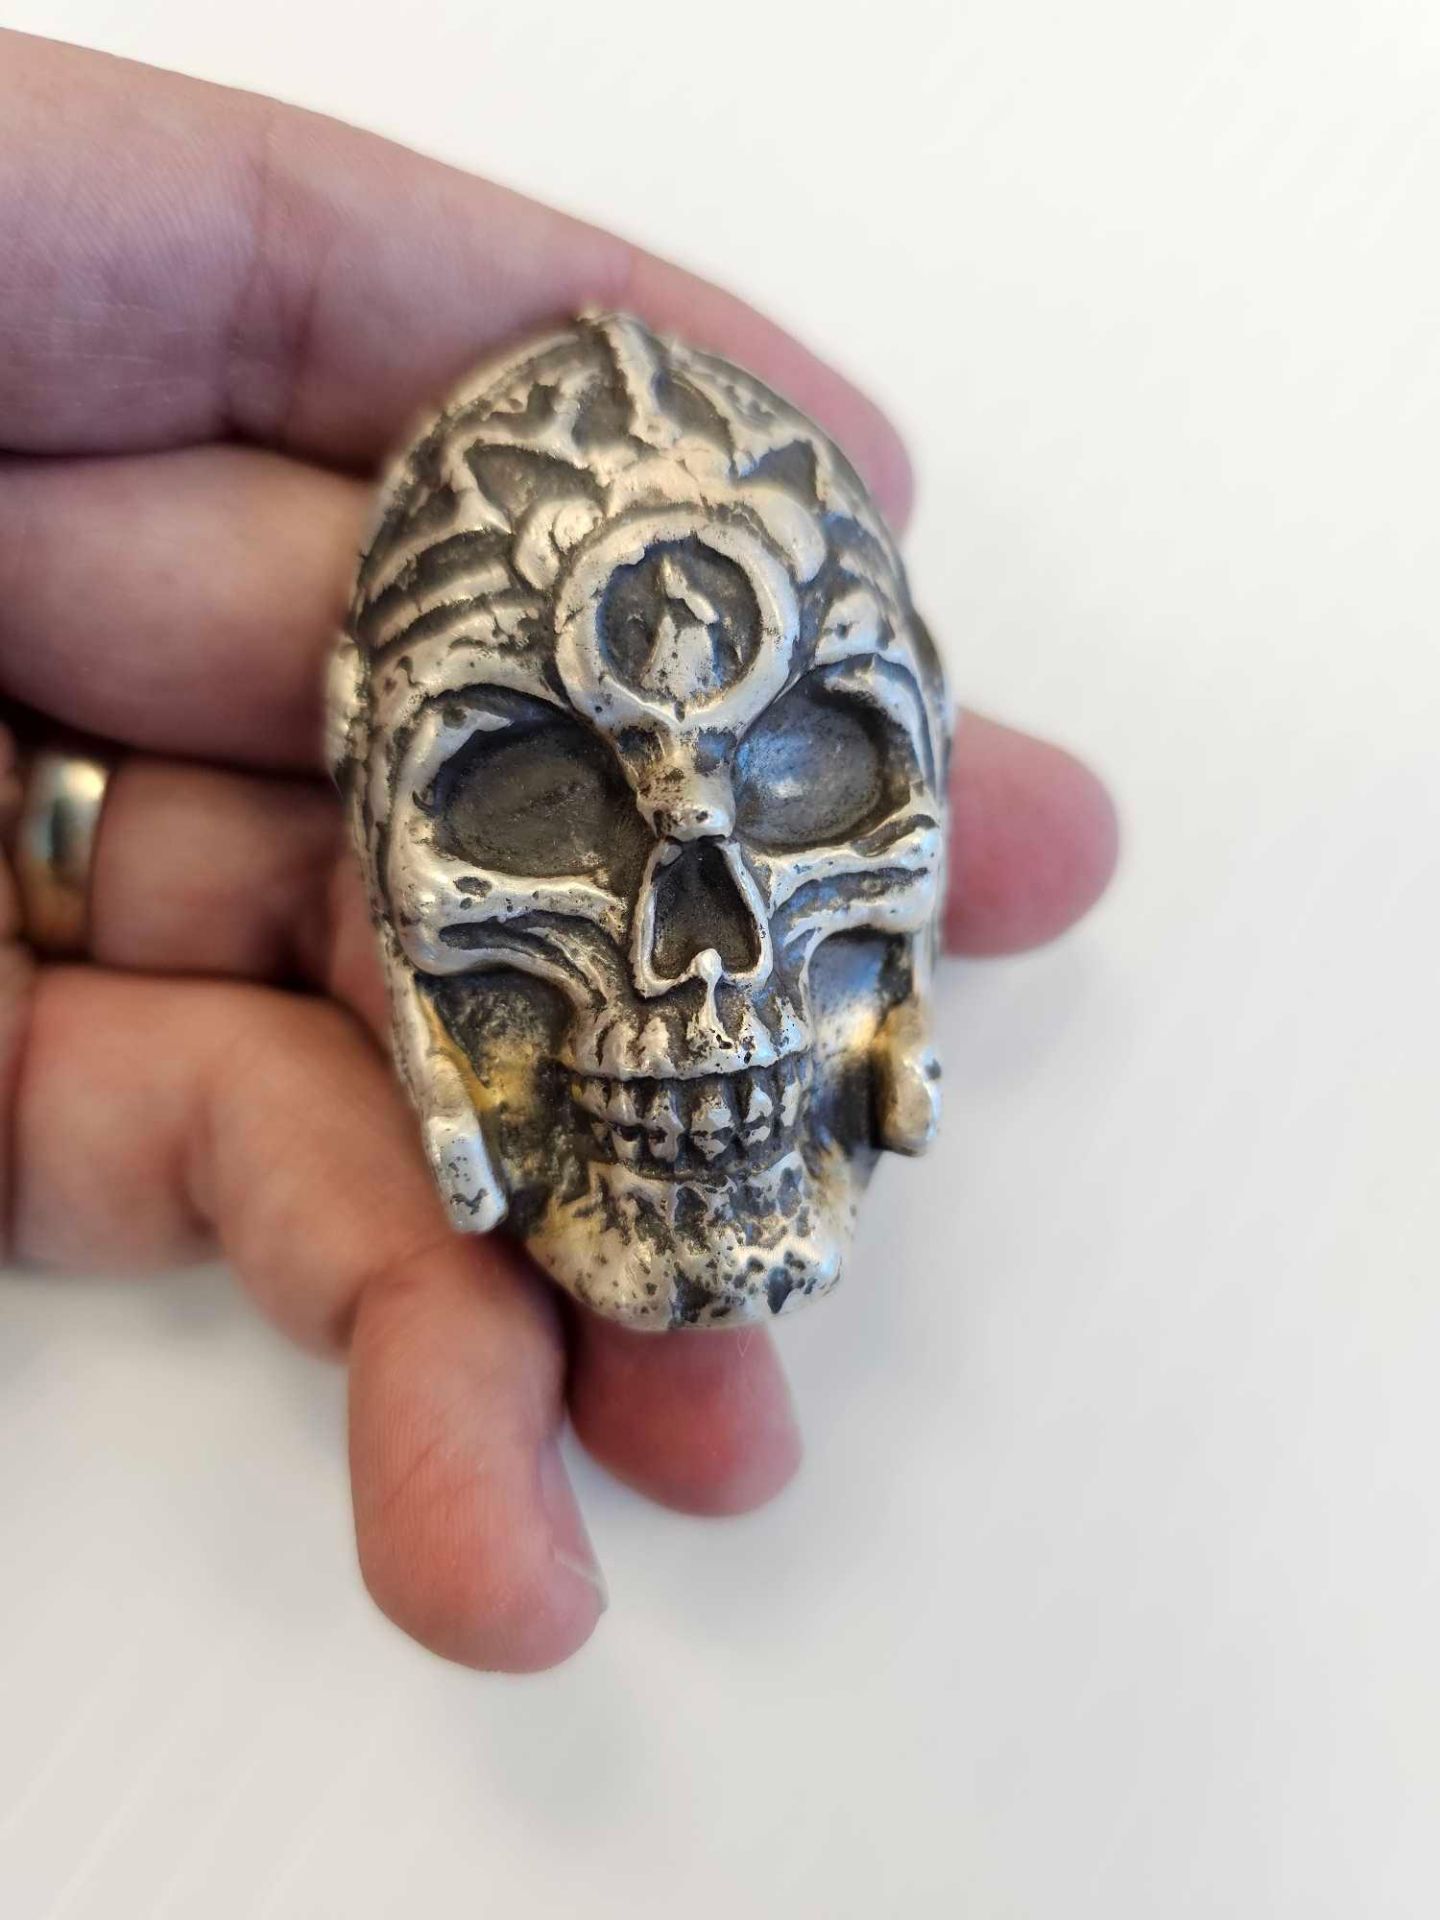 6 oz hand poured skull silver limited edition - Image 3 of 3